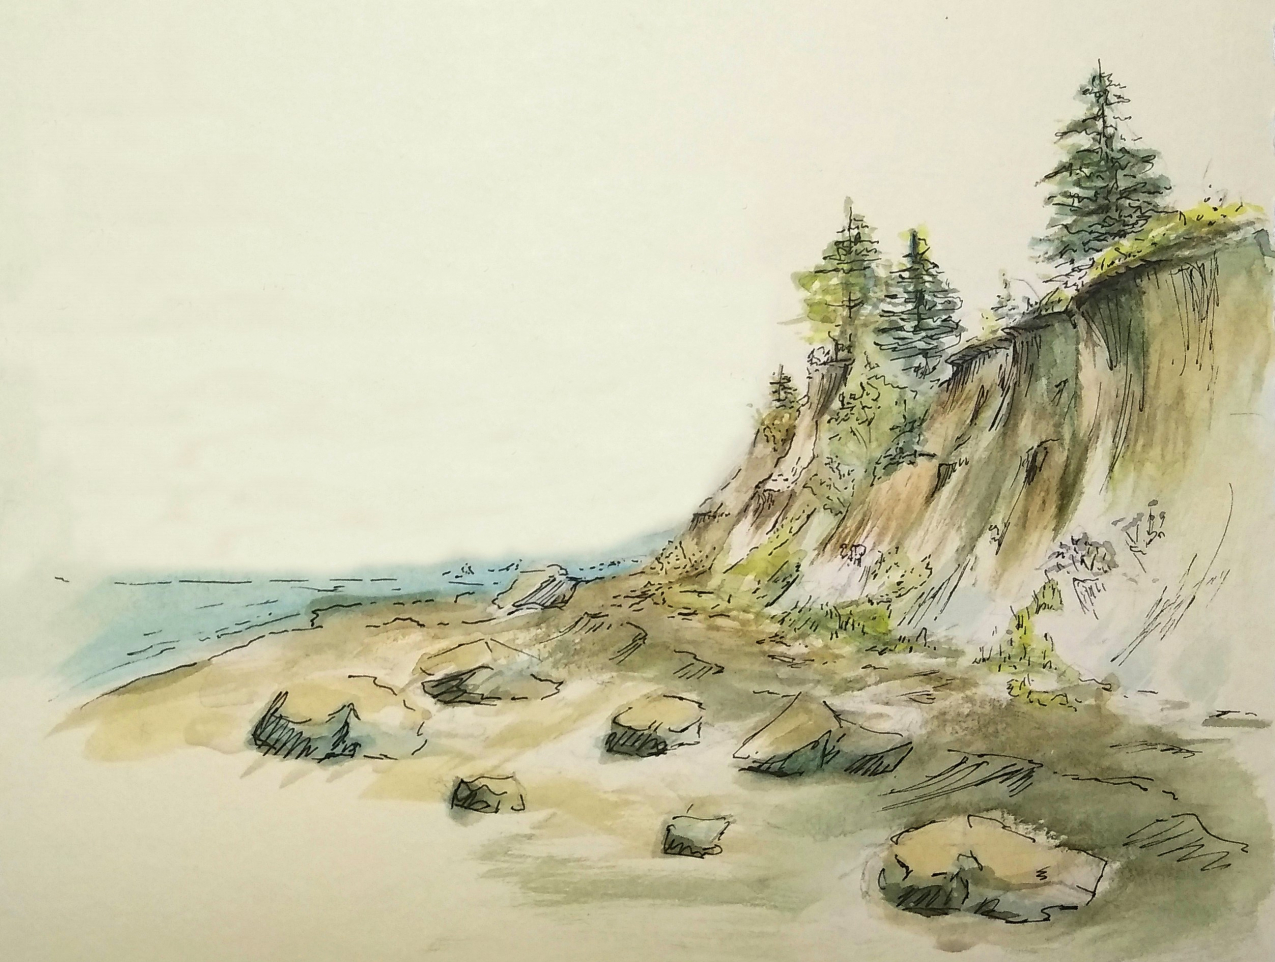 An eroded coastal cliffside with large rocks scattered at its base. A few conifers and shrubs hugs the top of the cliff. The painting evokes a sense of downward movement along the cliff towards calm water.